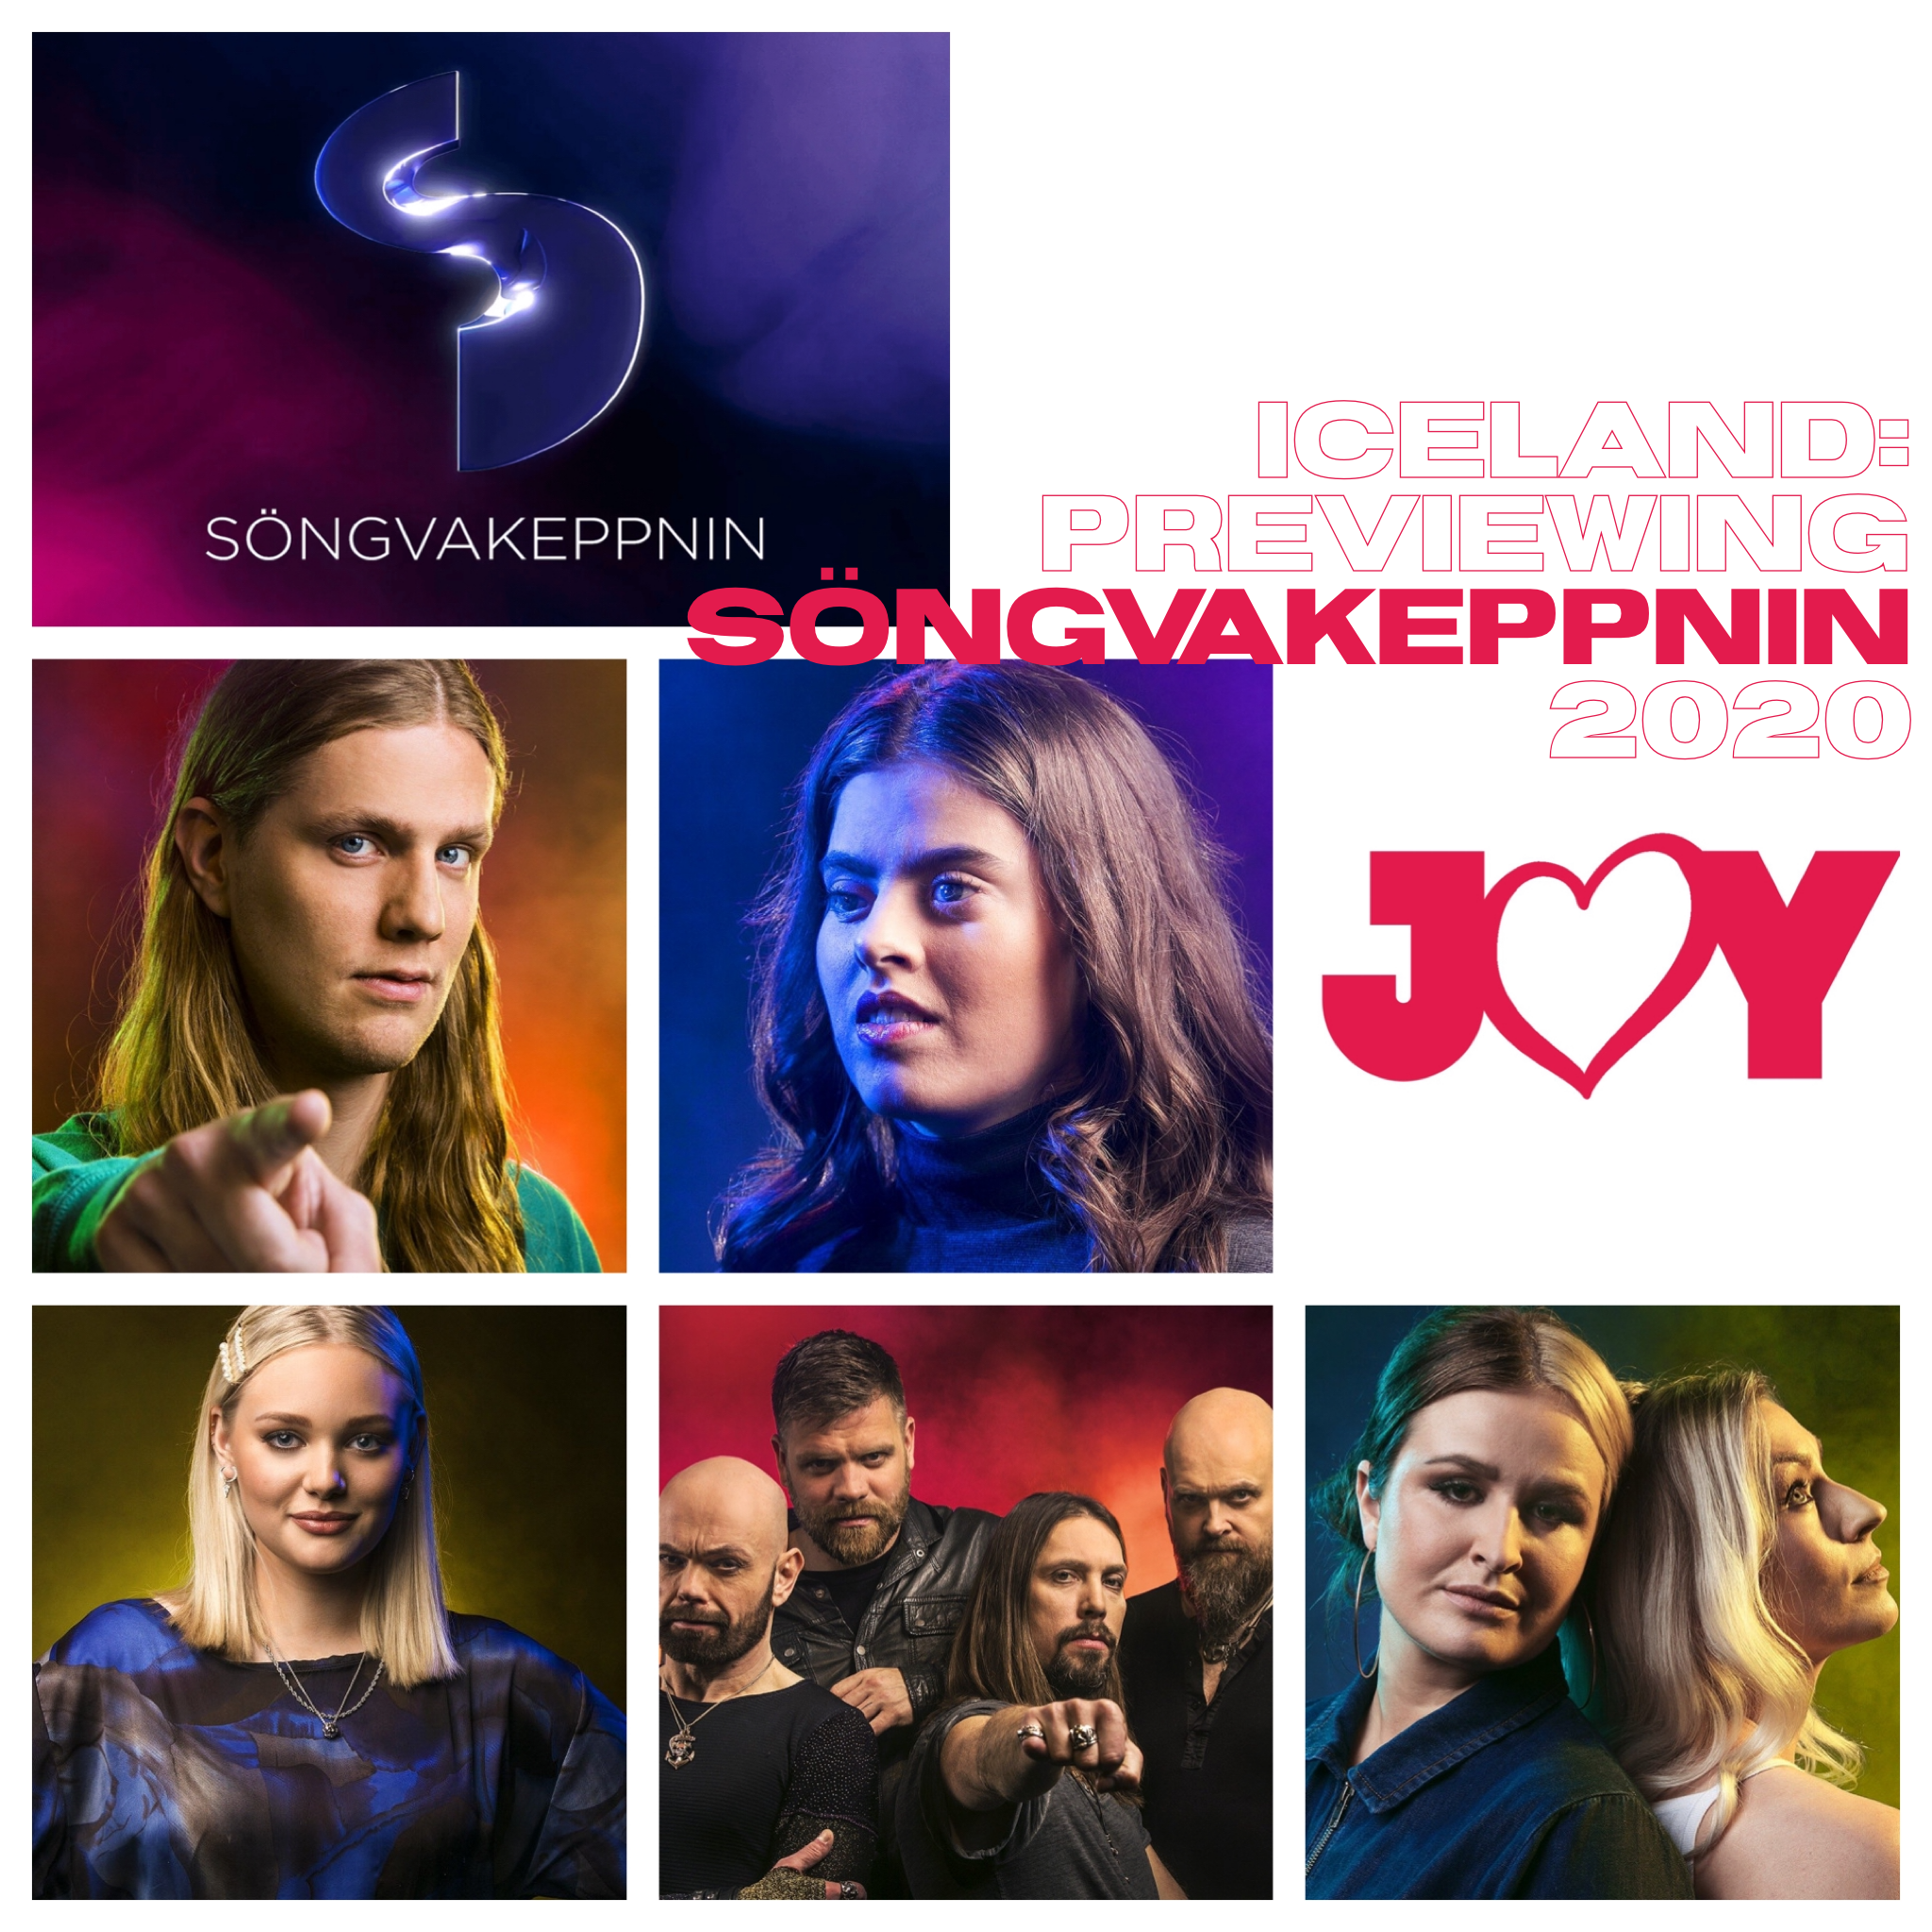 Iceland loses the leather: Previewing Söngvakeppnin 2020